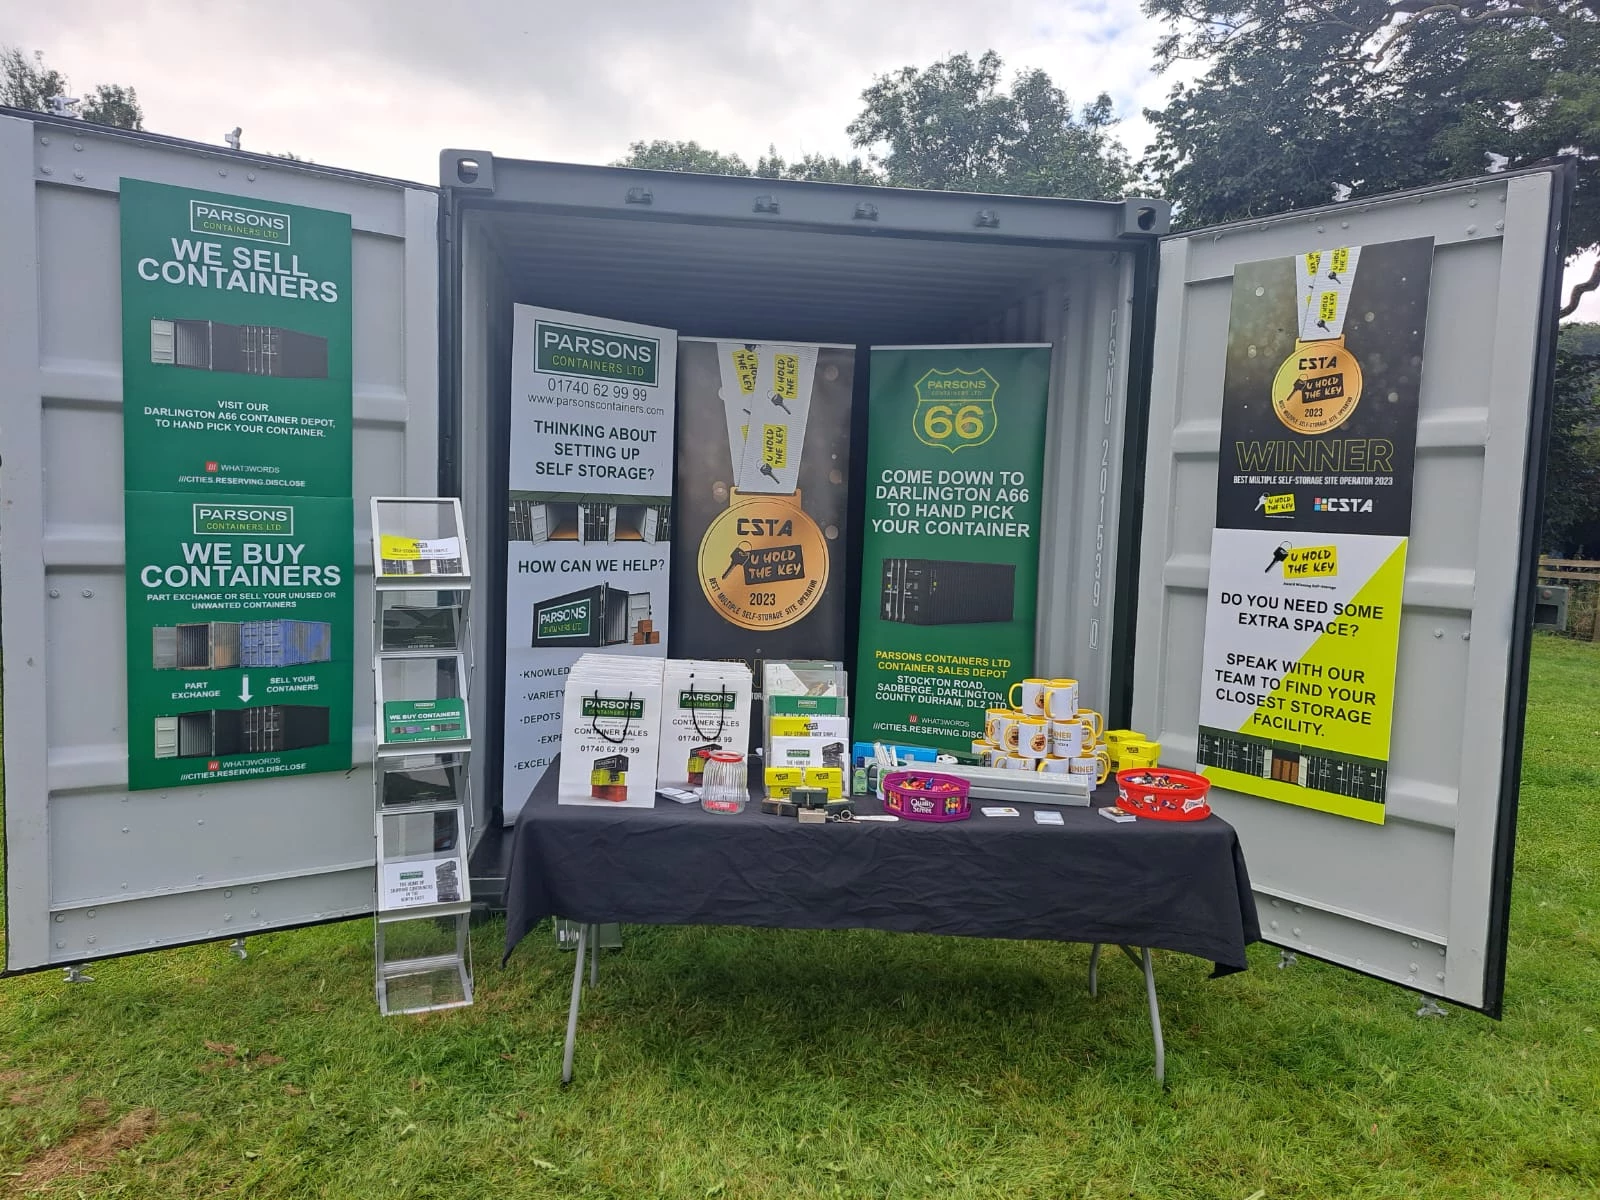 The Parsons Containers stand at Wolsingham Show